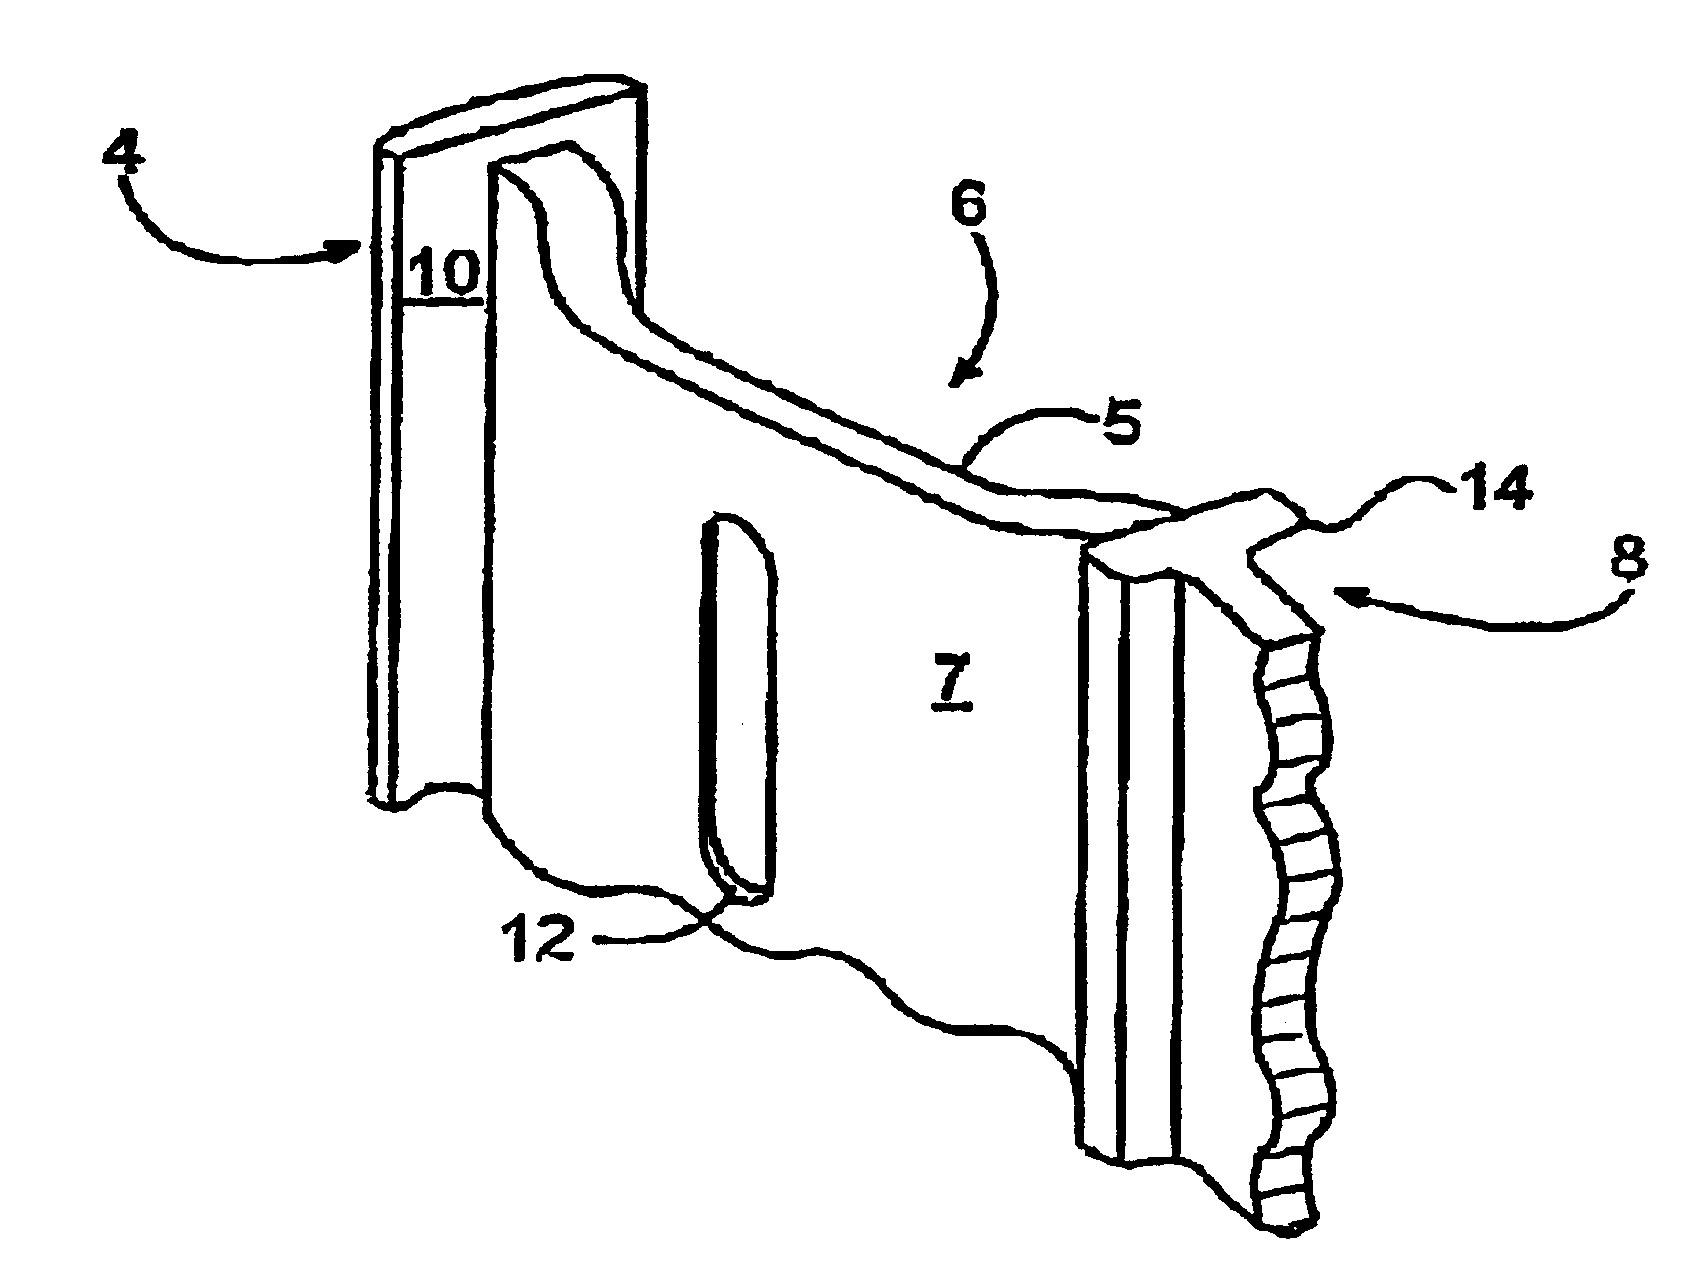 Support for securing cantilevered shelving to an insulated unit